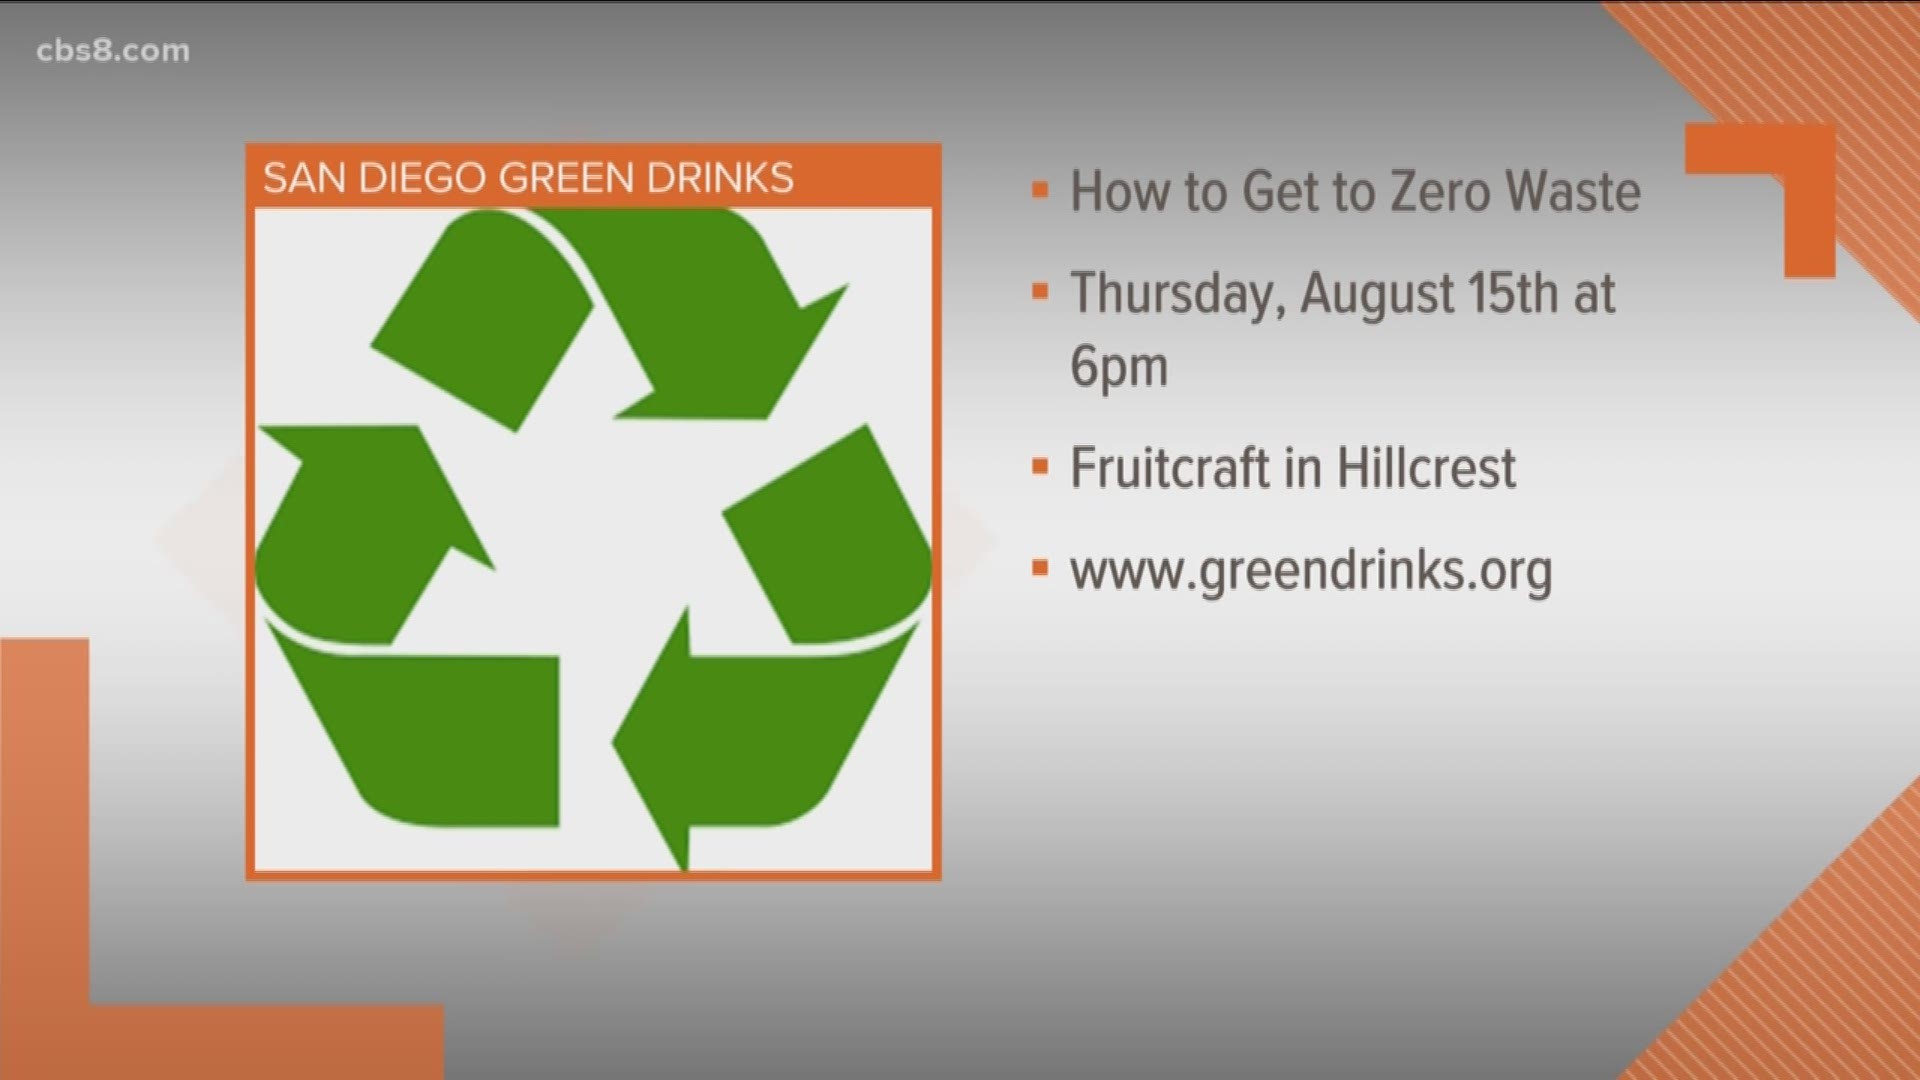 Learn ways to achieve a more zero waste lifestyle at the Zero Waste Panel on August 15